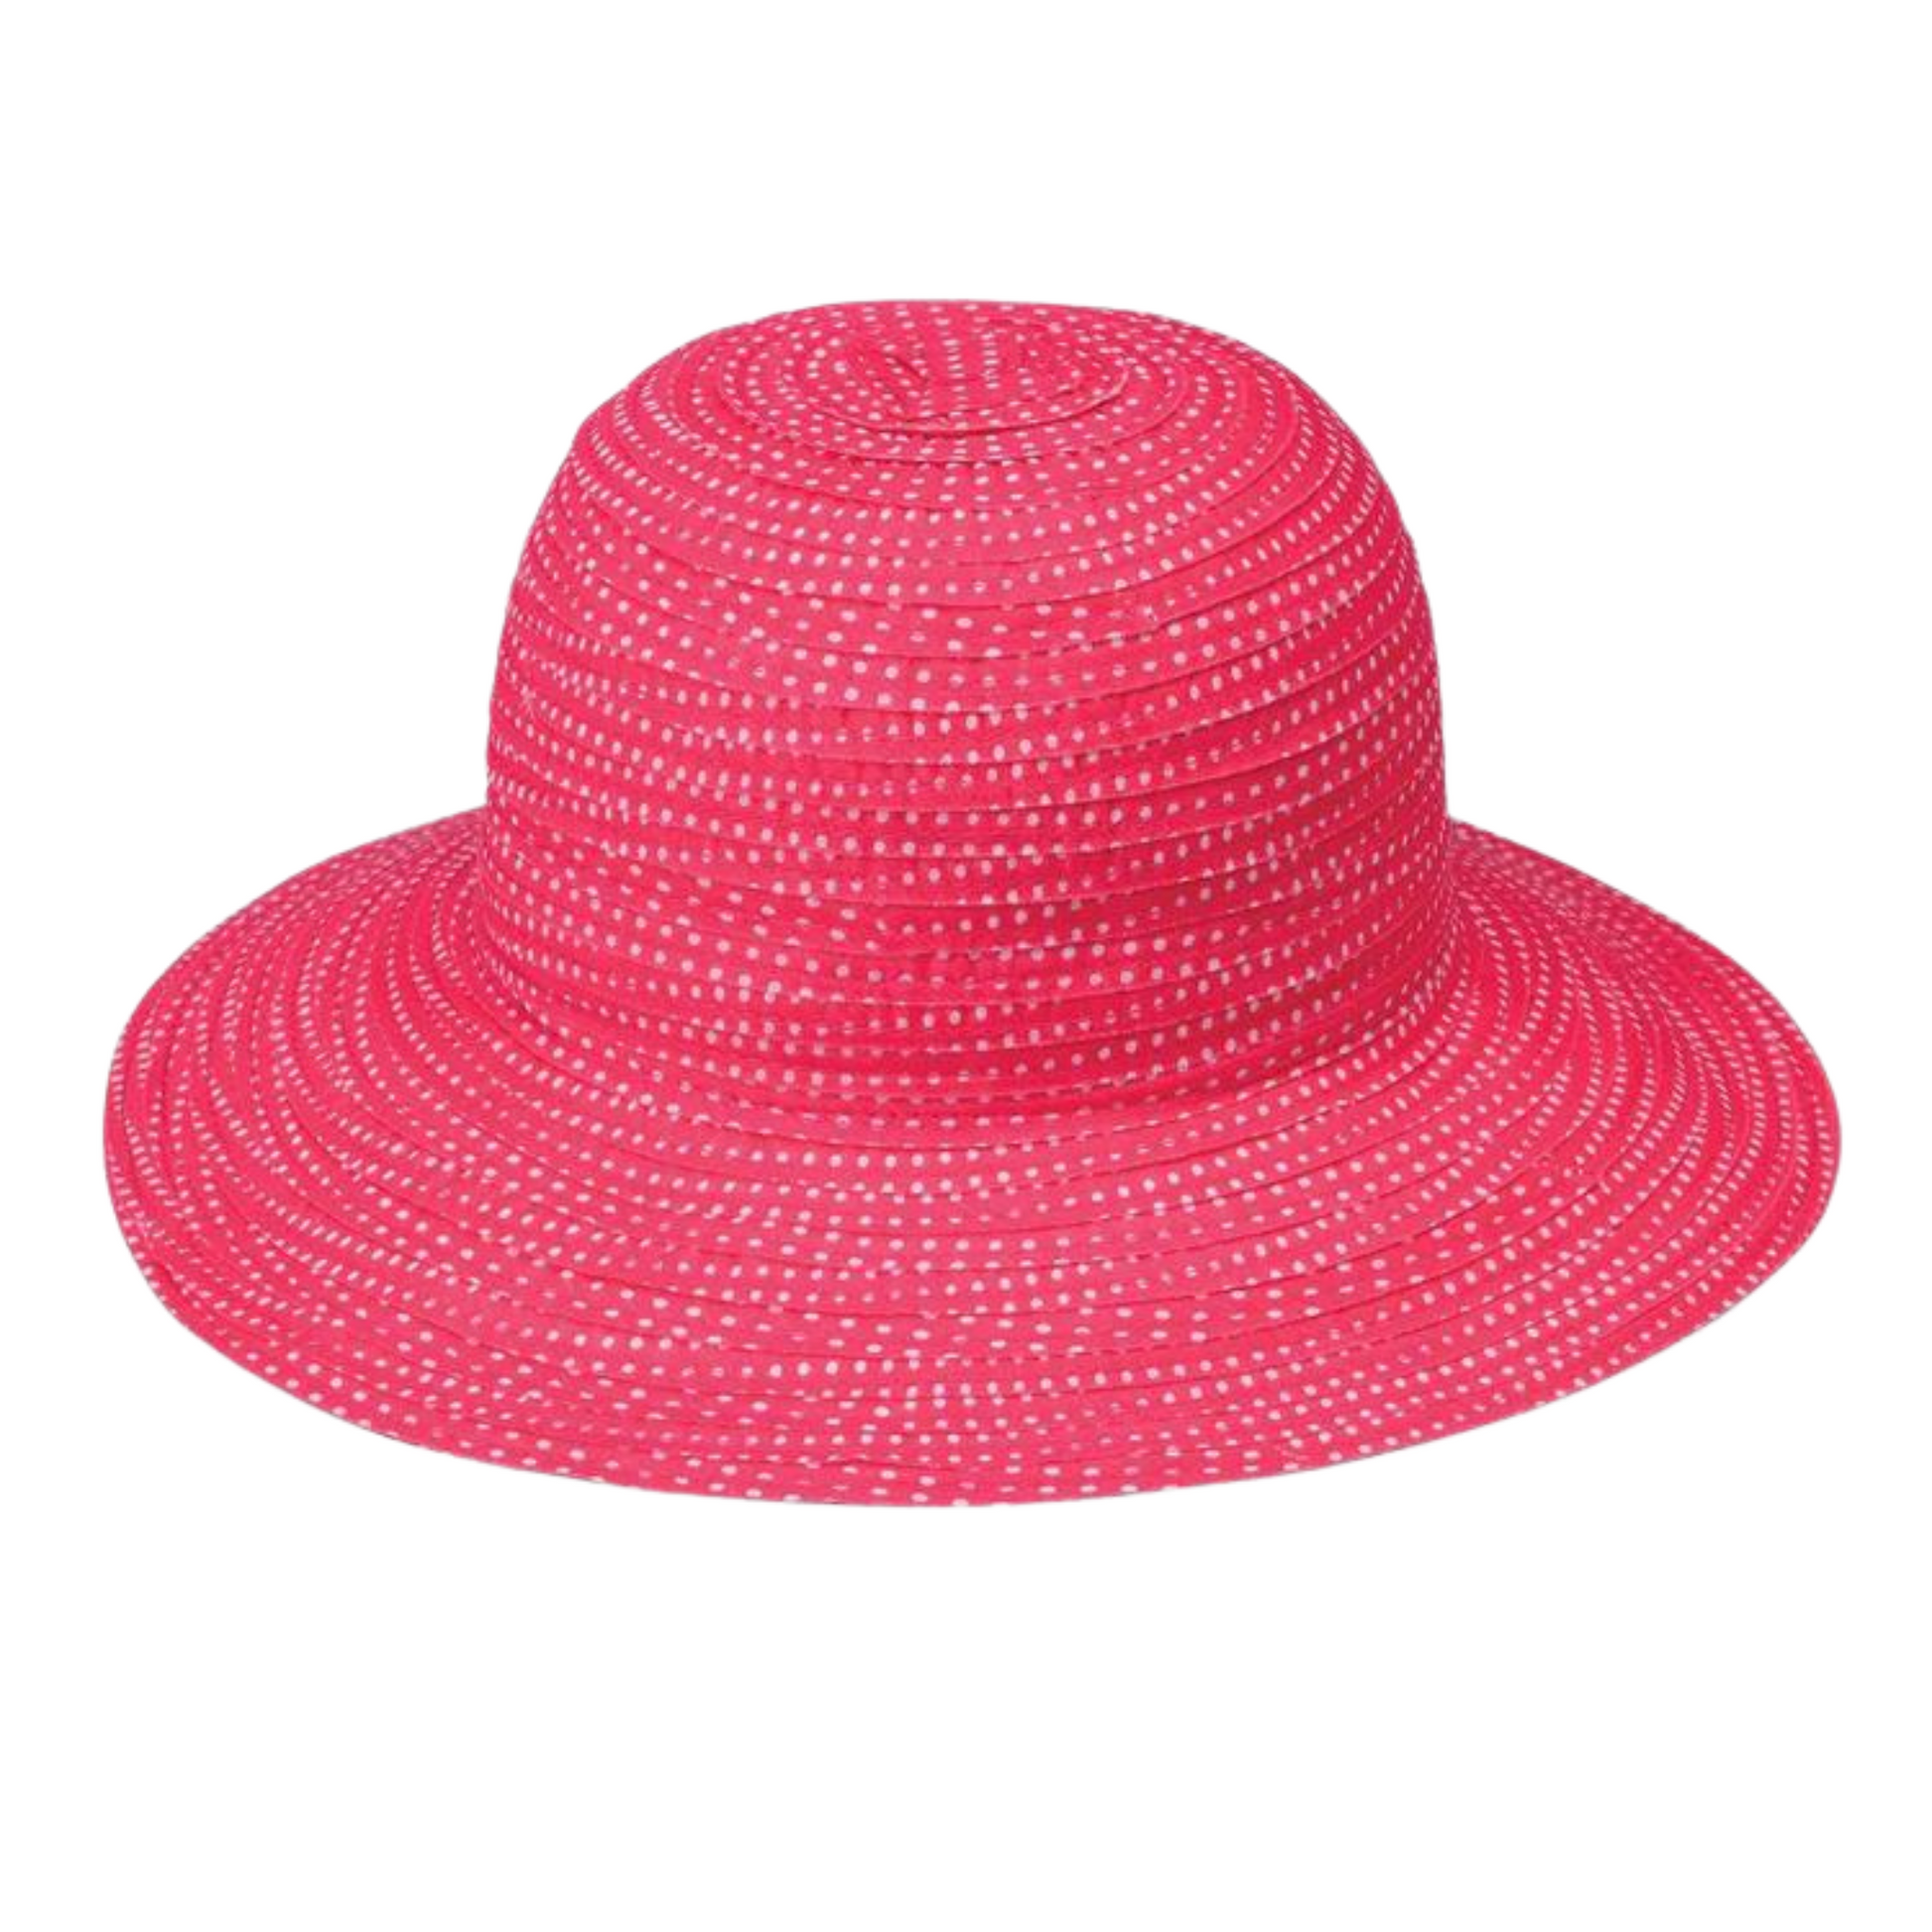 Pink hat with a varied informal wrap texture with white polka dots.